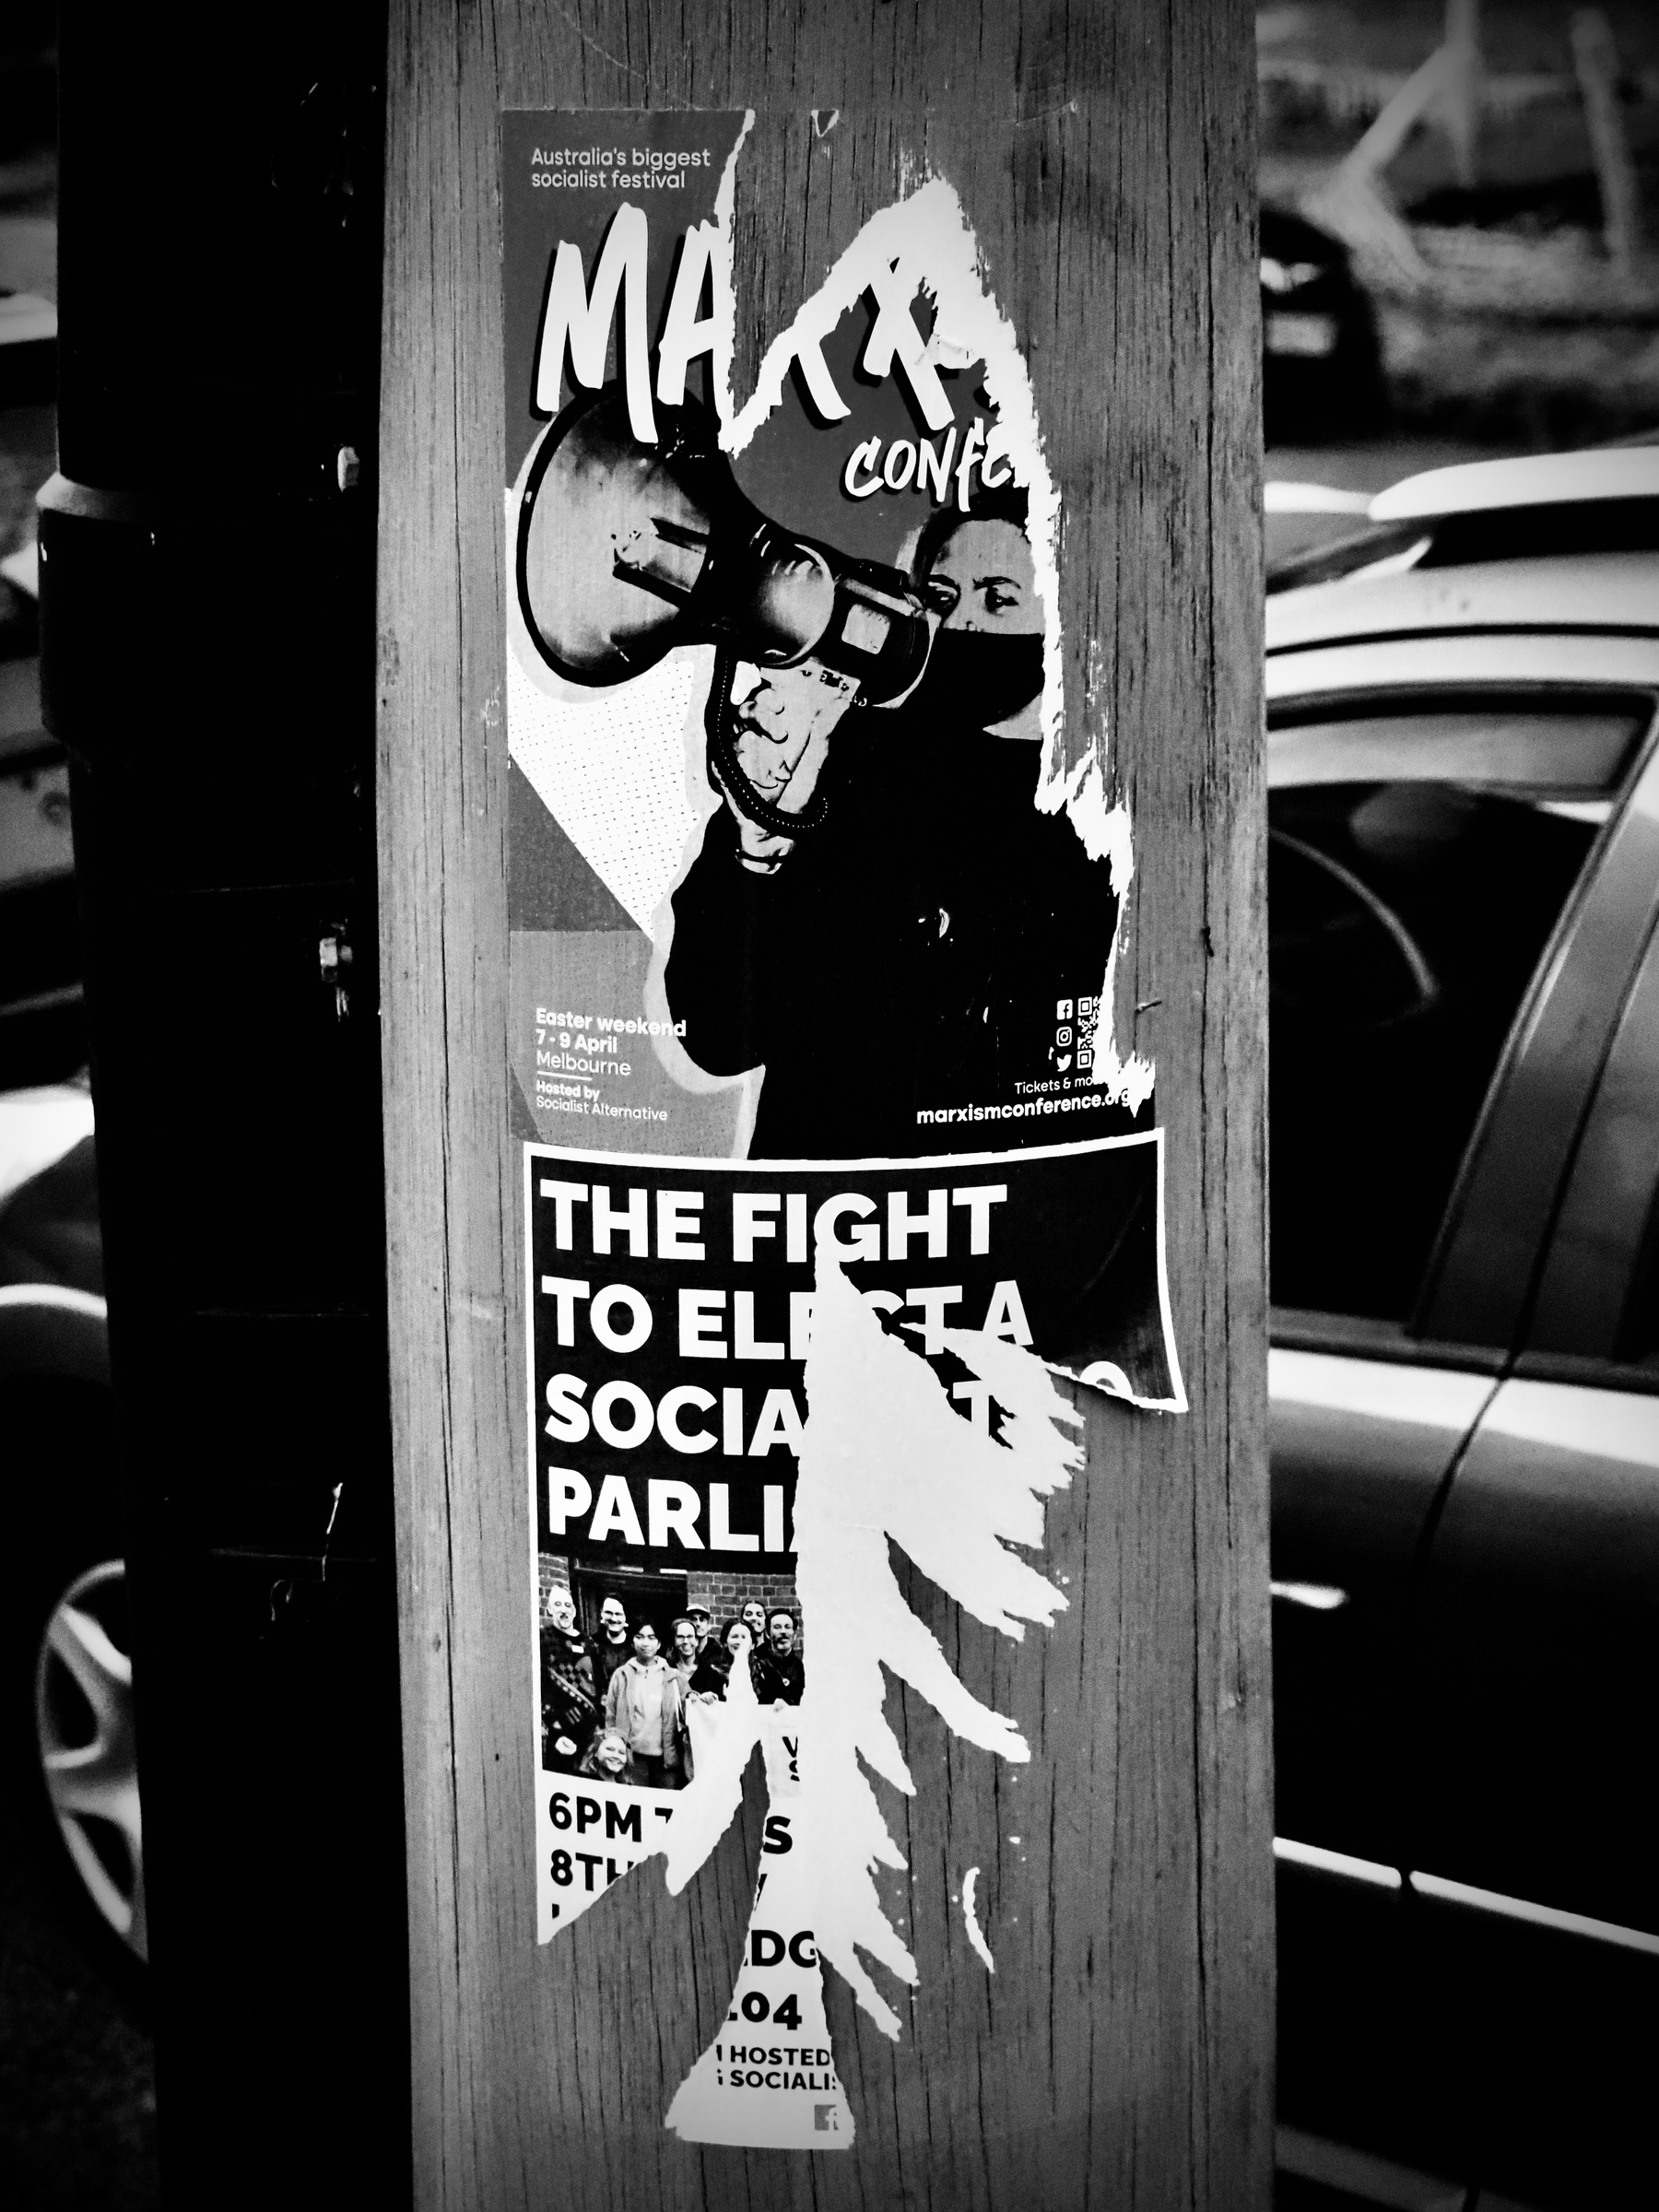 Torn bill posters on a wooden power pole that advertise Marxism and socialism